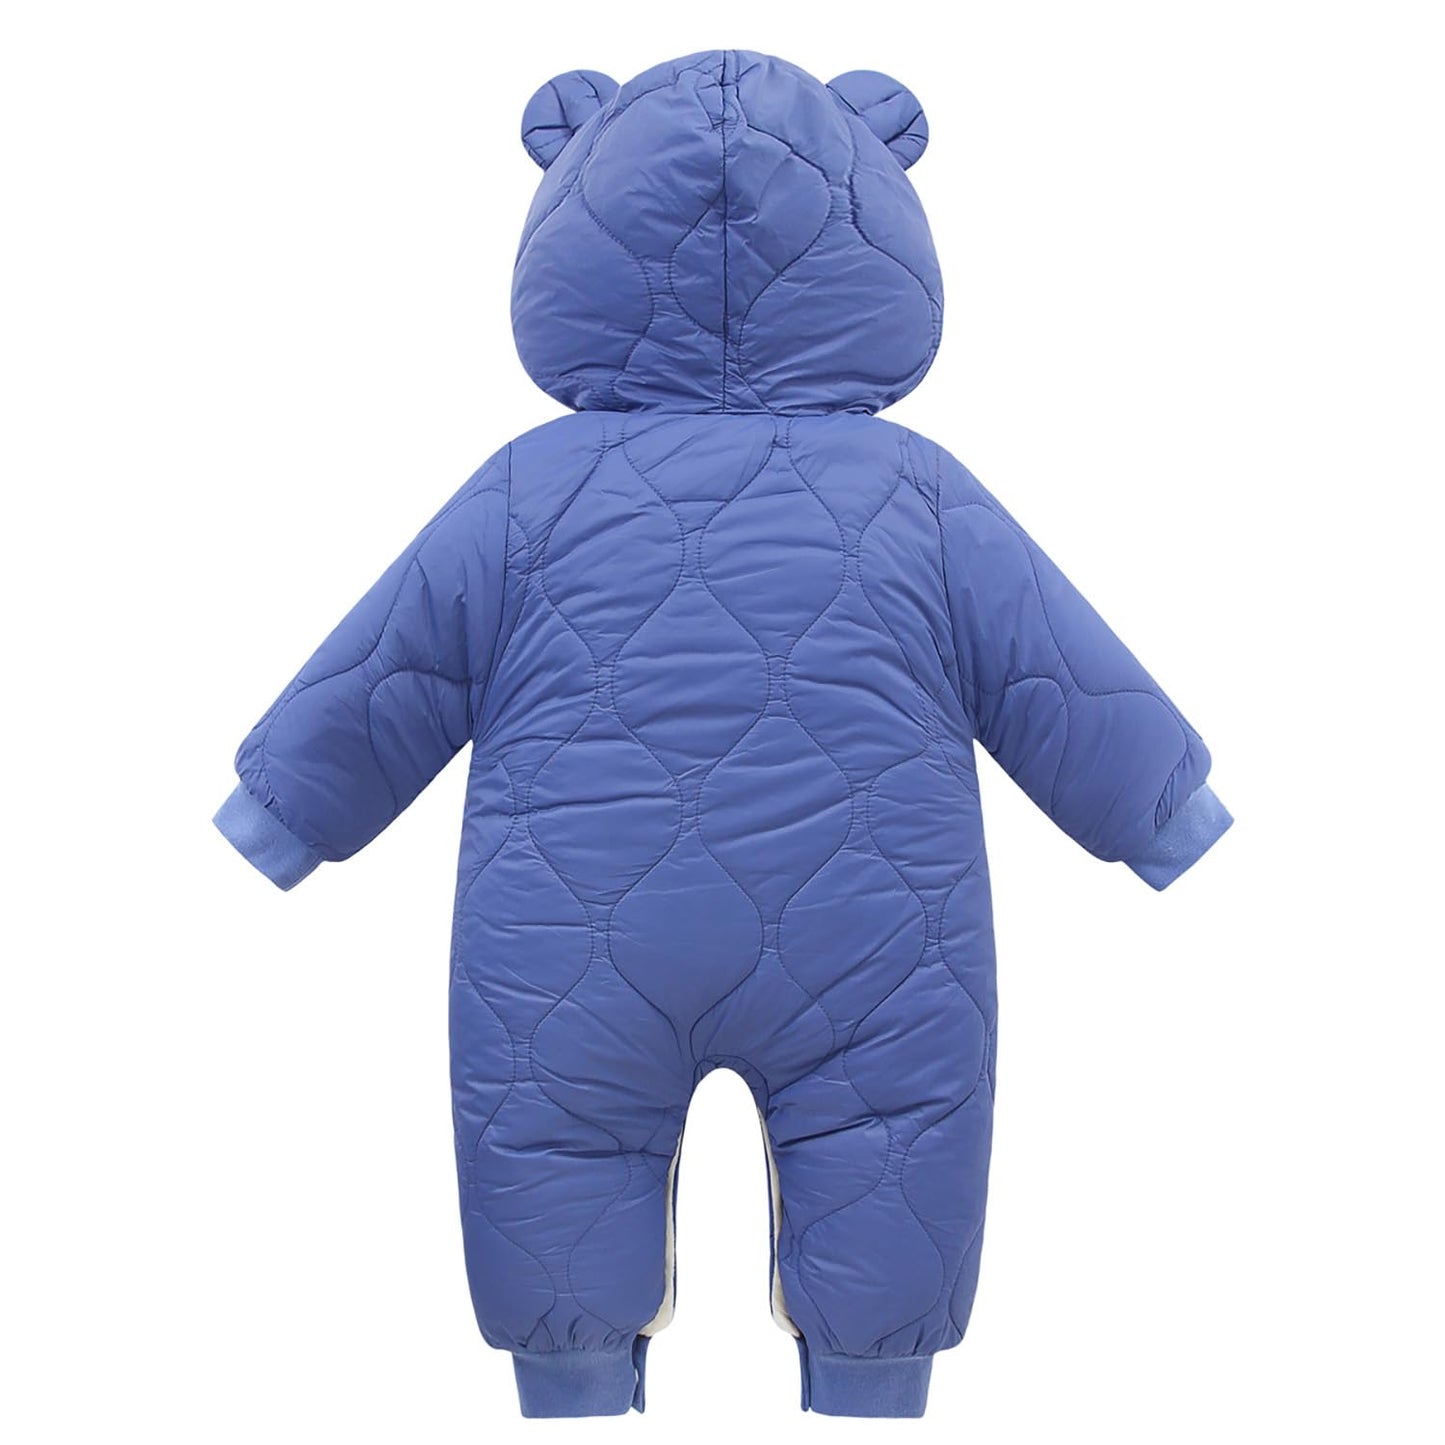 Cute Baby Boys Girls Snowsuit Infant Winter Coat Toddler Onesie Outwear Clothes (0-3 Months)